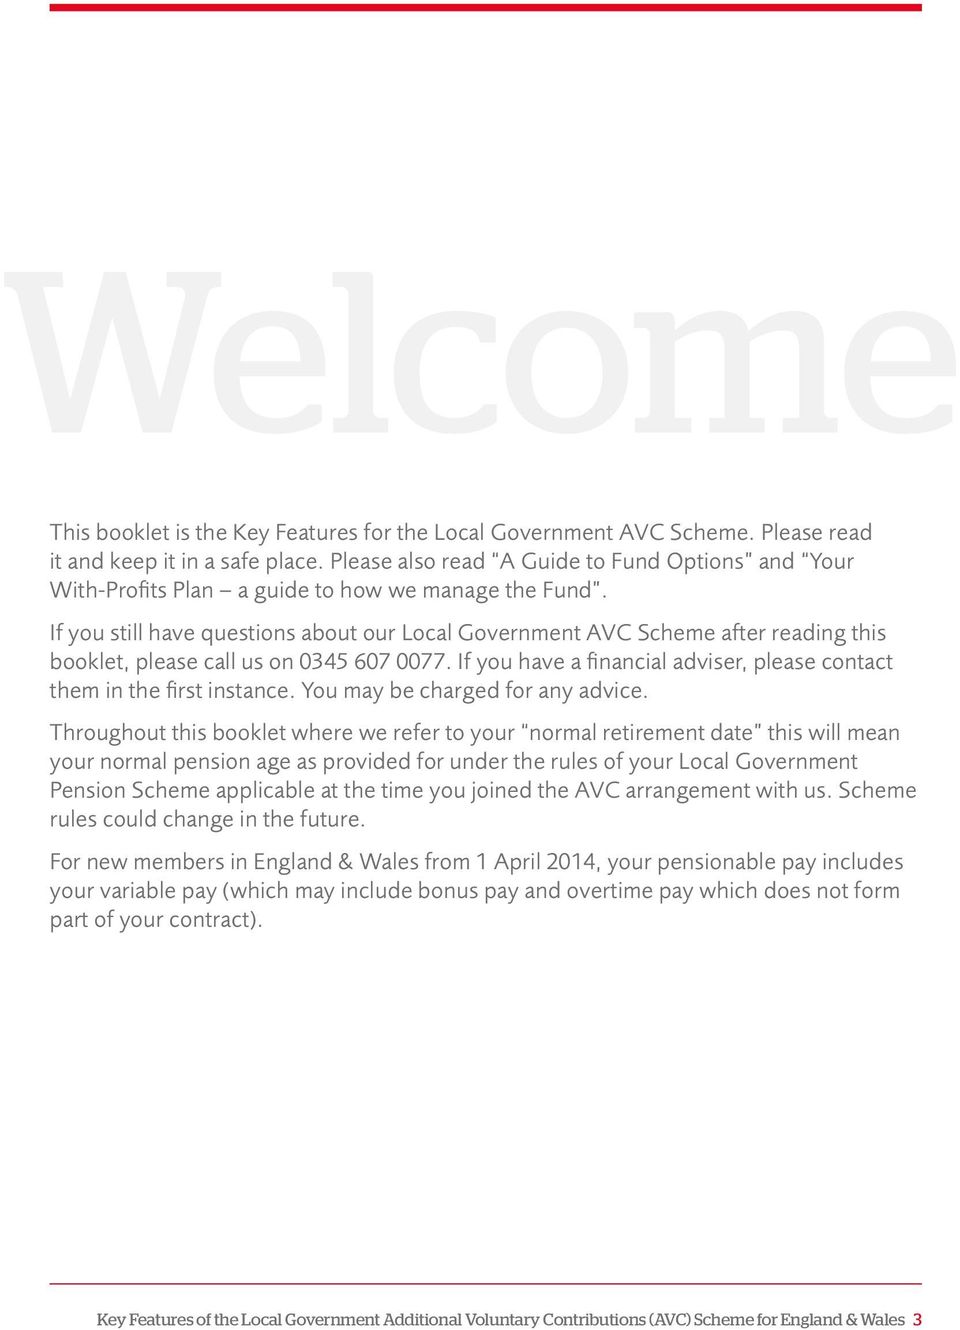 If you still have questions about our Local Government AVC Scheme after reading this booklet, please call us on 0345 607 0077.